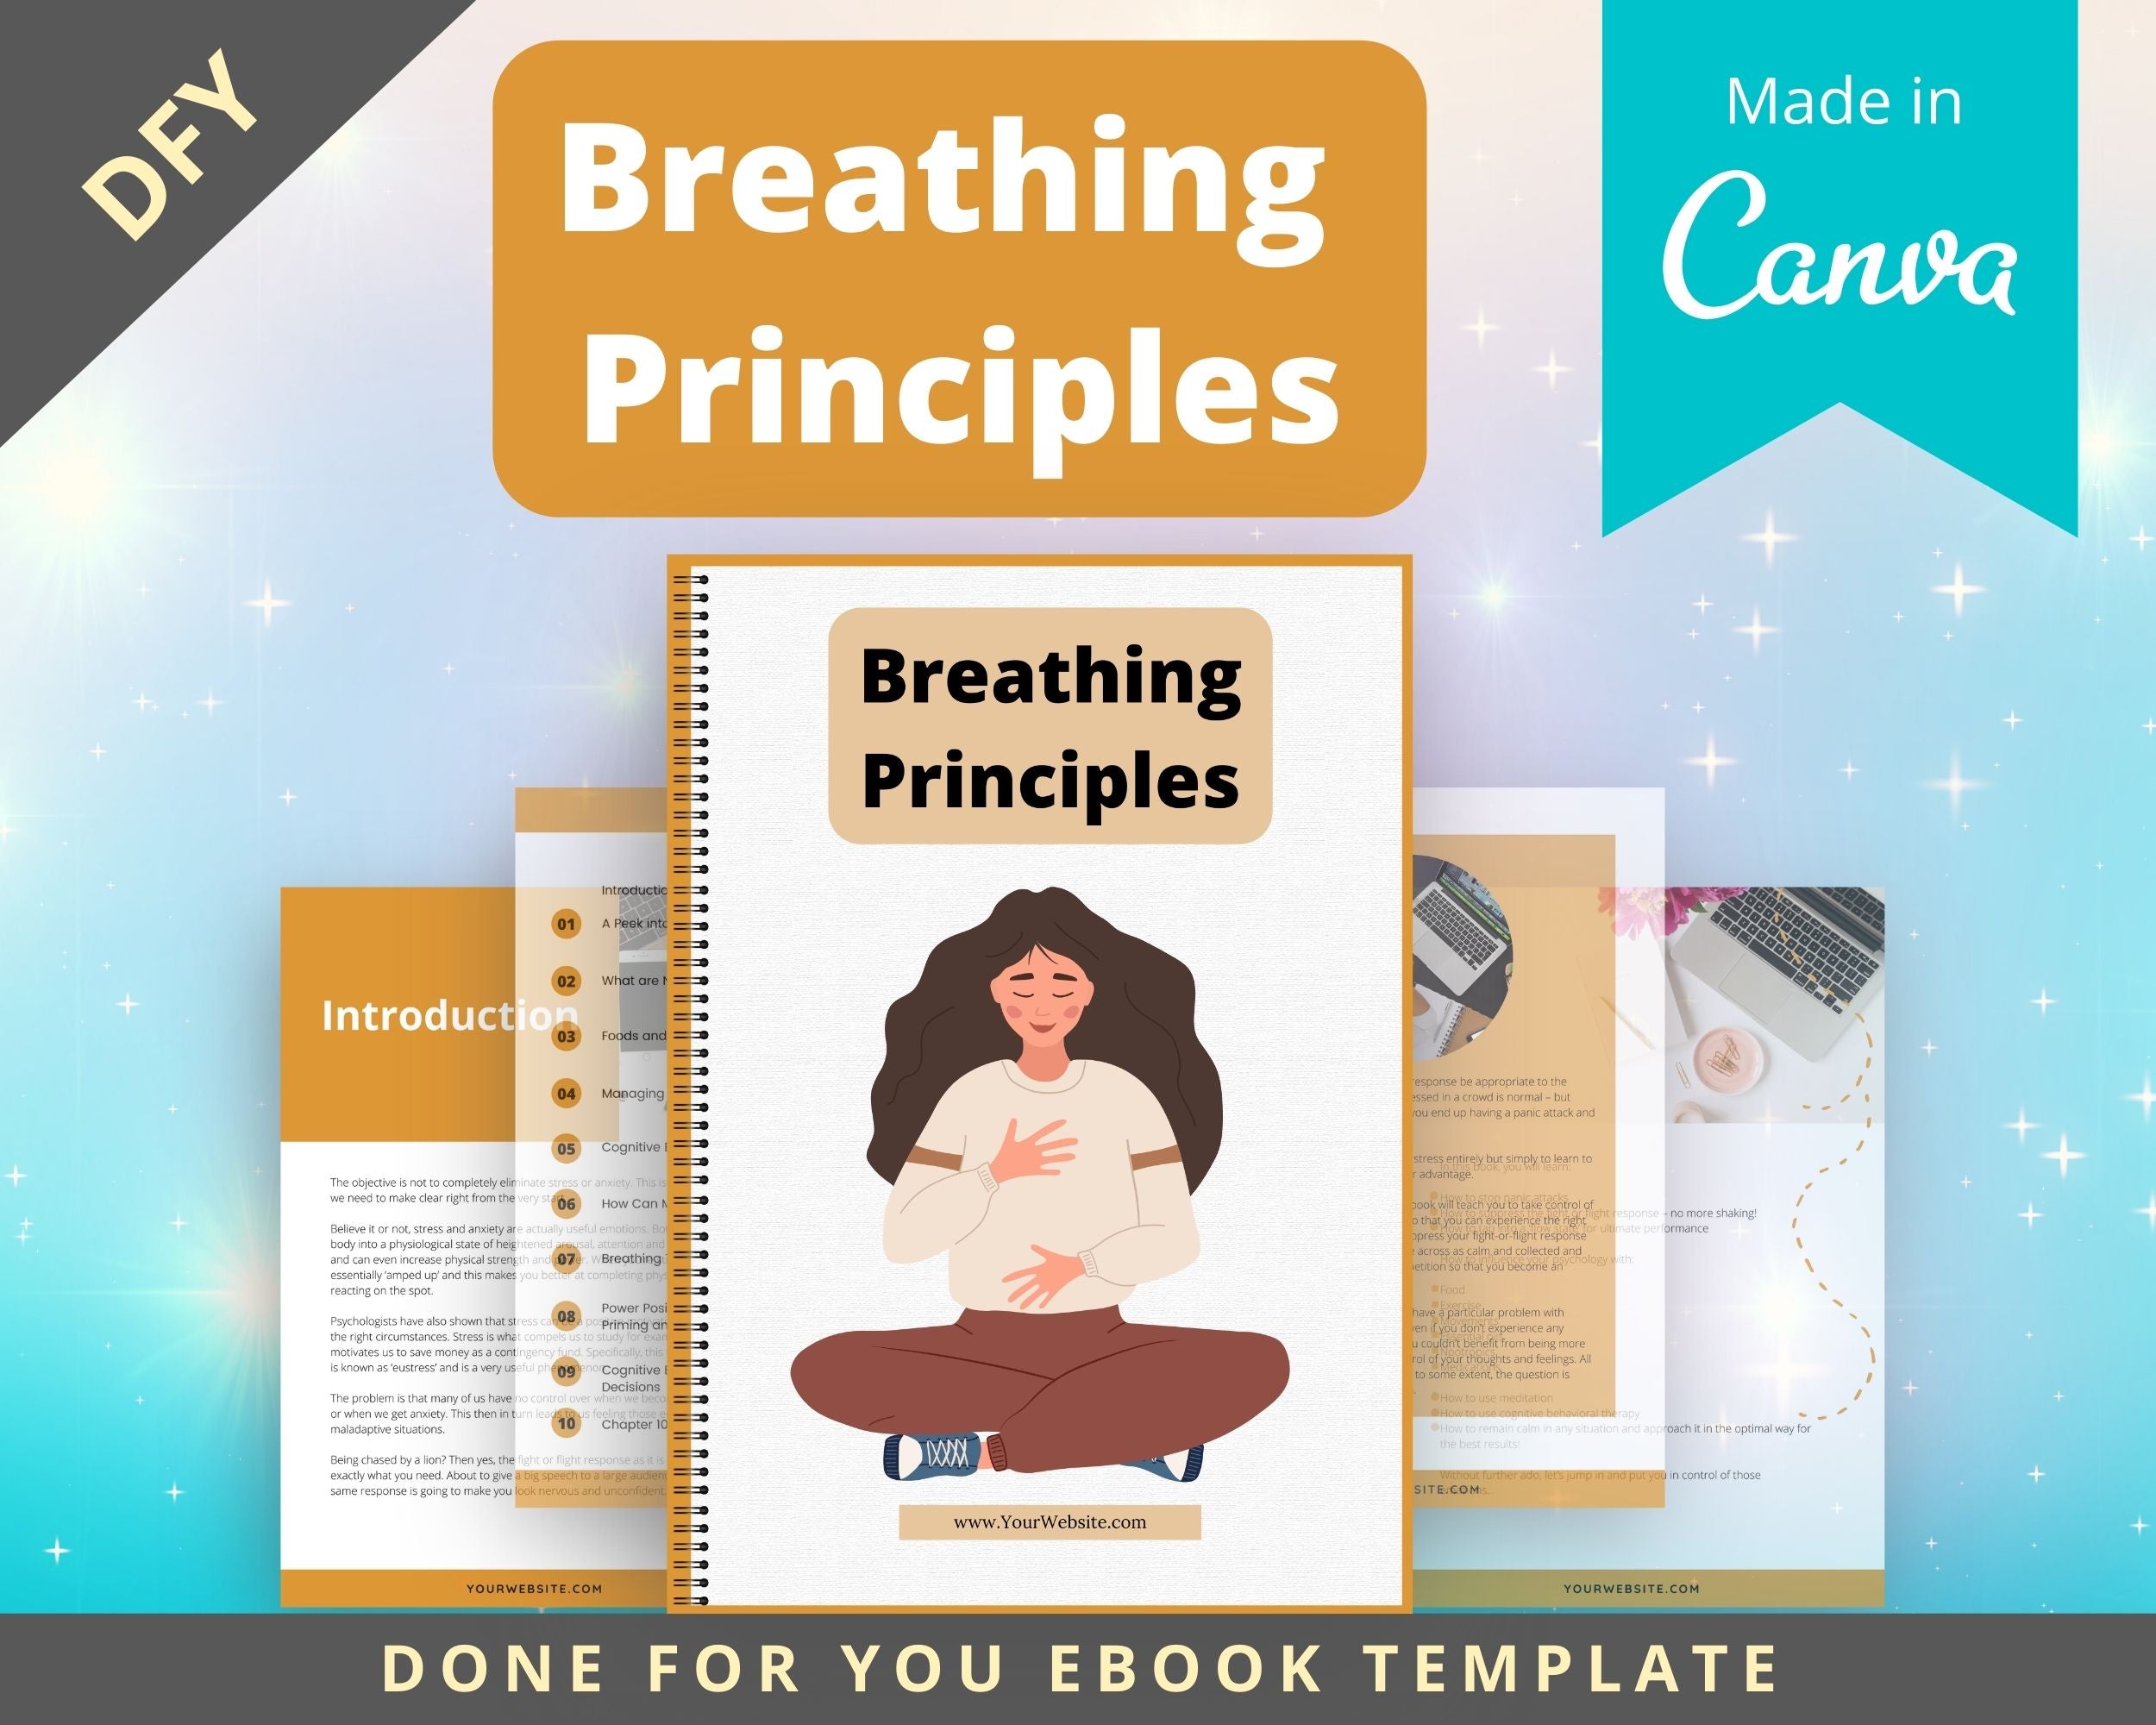 Editable Breathing Principles Ebook | Done-for-You Ebook in Canva | Rebrandable and Resizable Canva Template